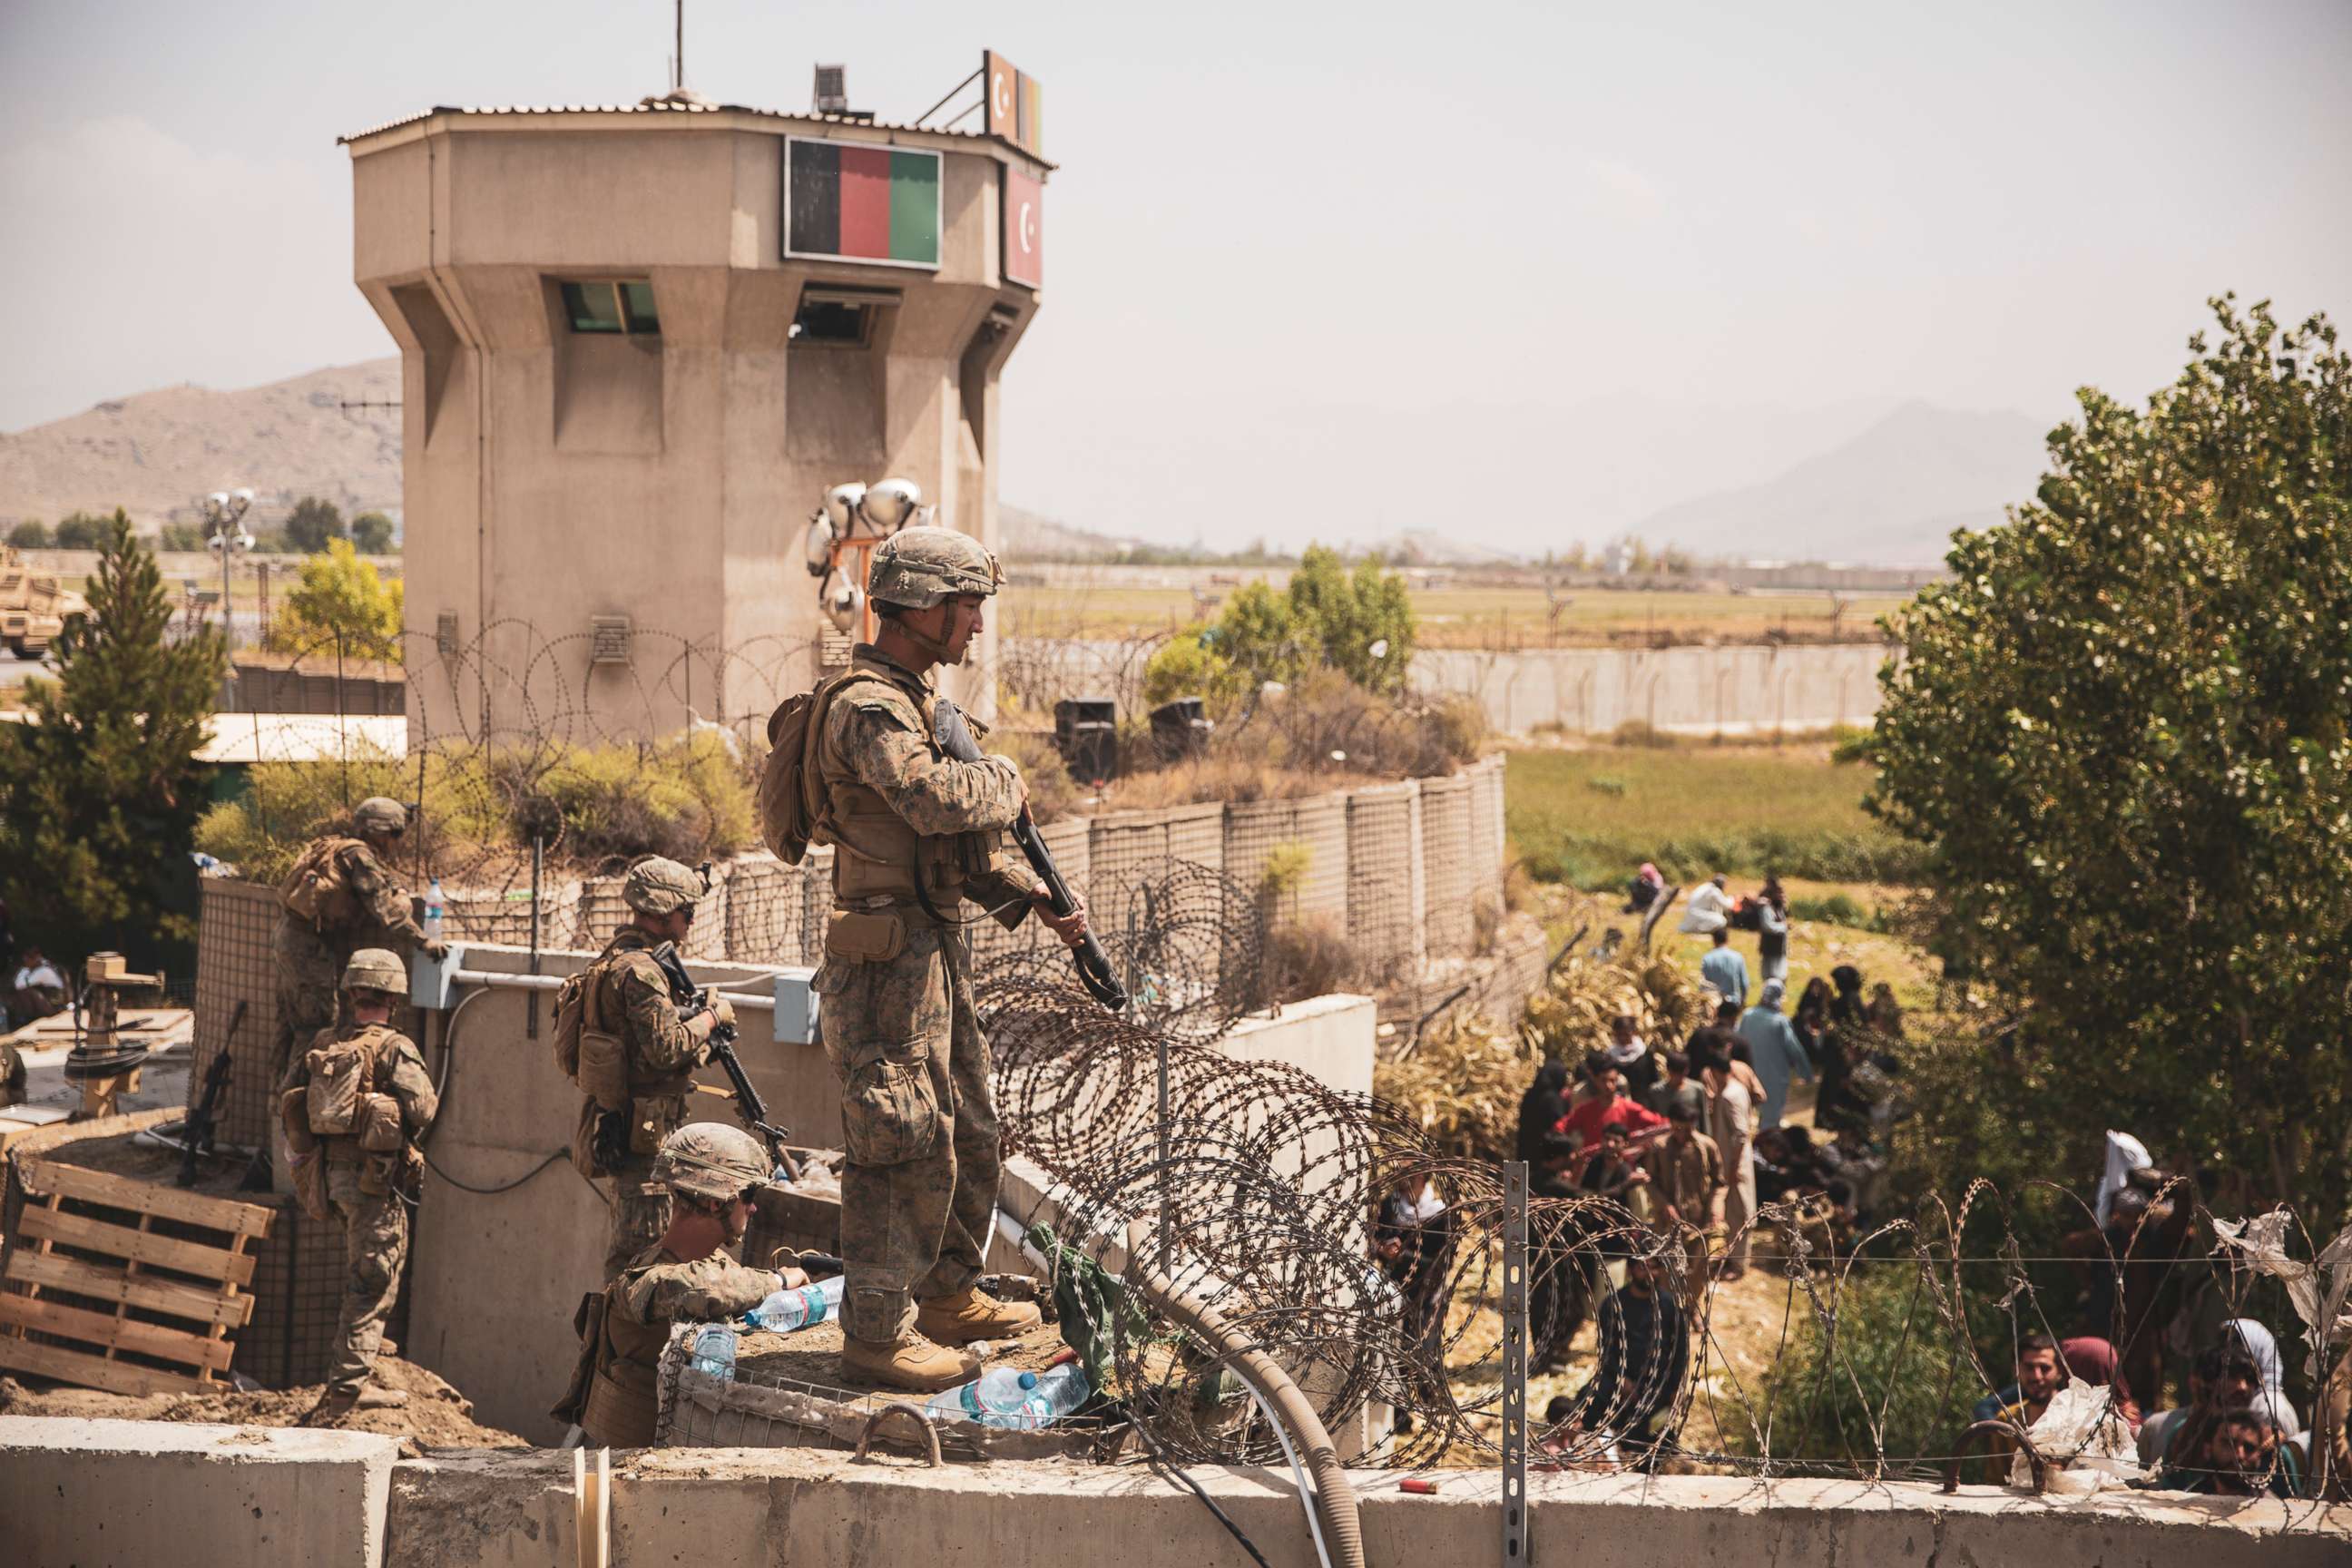 PHOTO: U.S. Marines assist with security at an Evacuation Control Checkpoint during an evacuation at Hamid Karzai International Airport, Kabul, Afghanistan, Aug. 20, 2021.